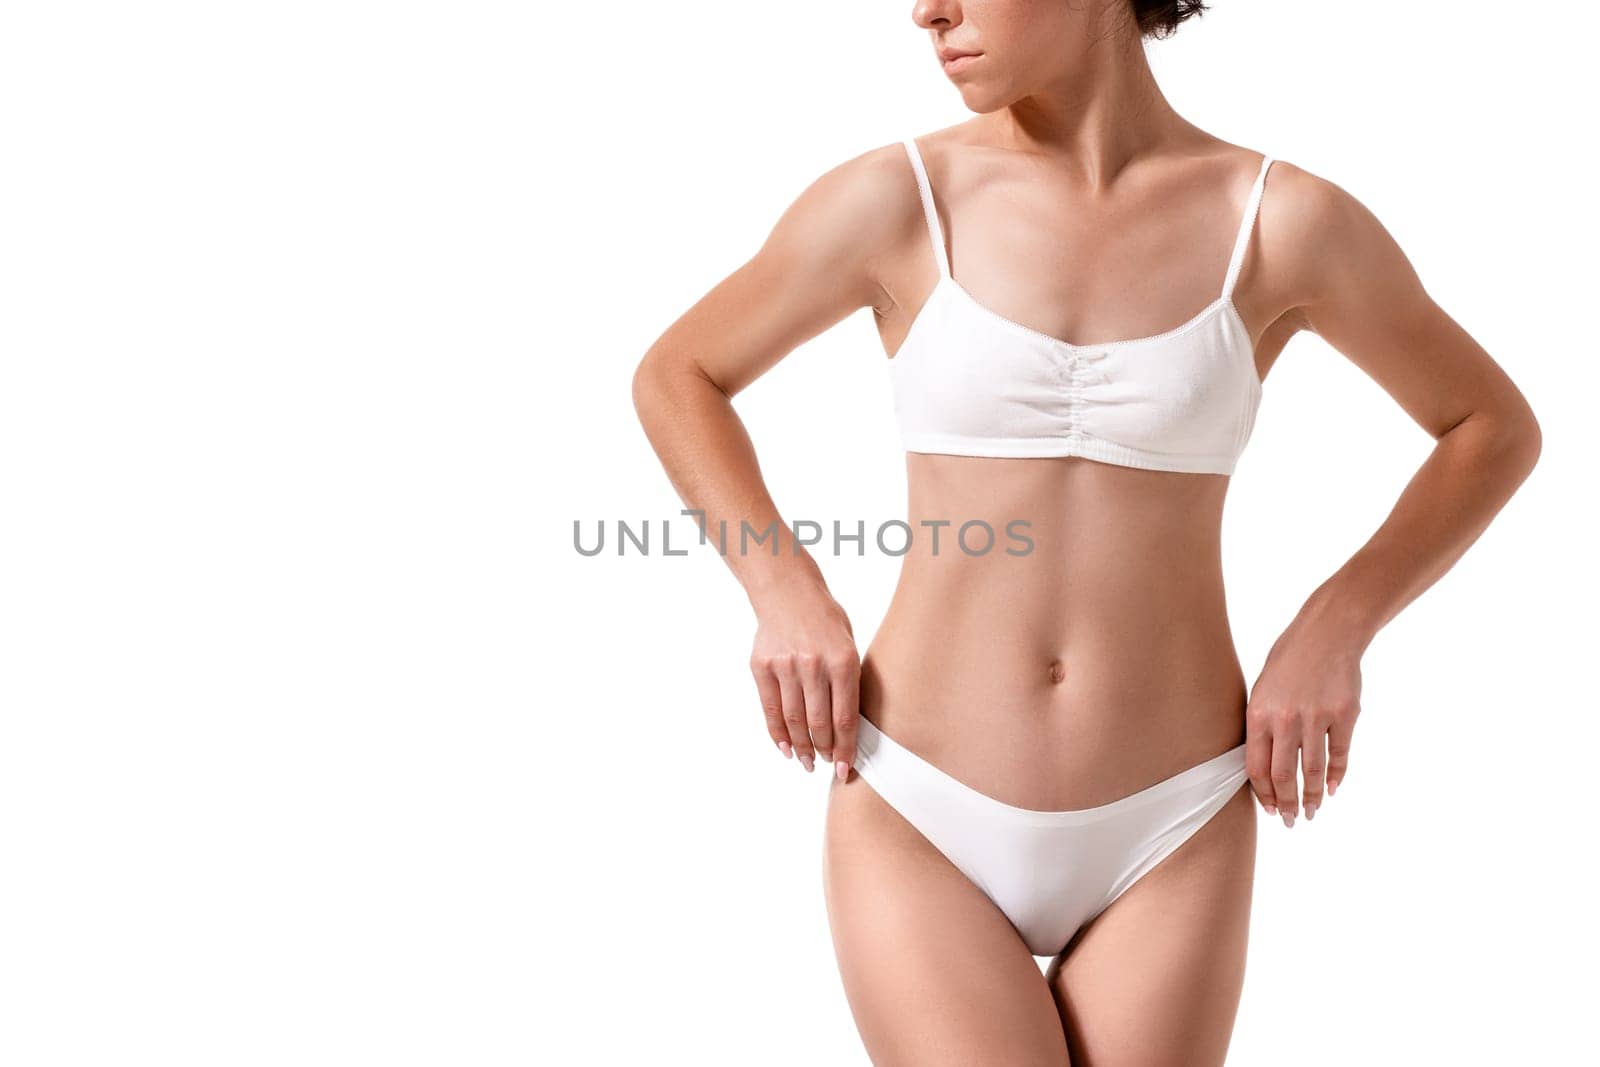 Slim tanned woman's body. Isolated over white background. Diet. Sport. Health plastic surgery